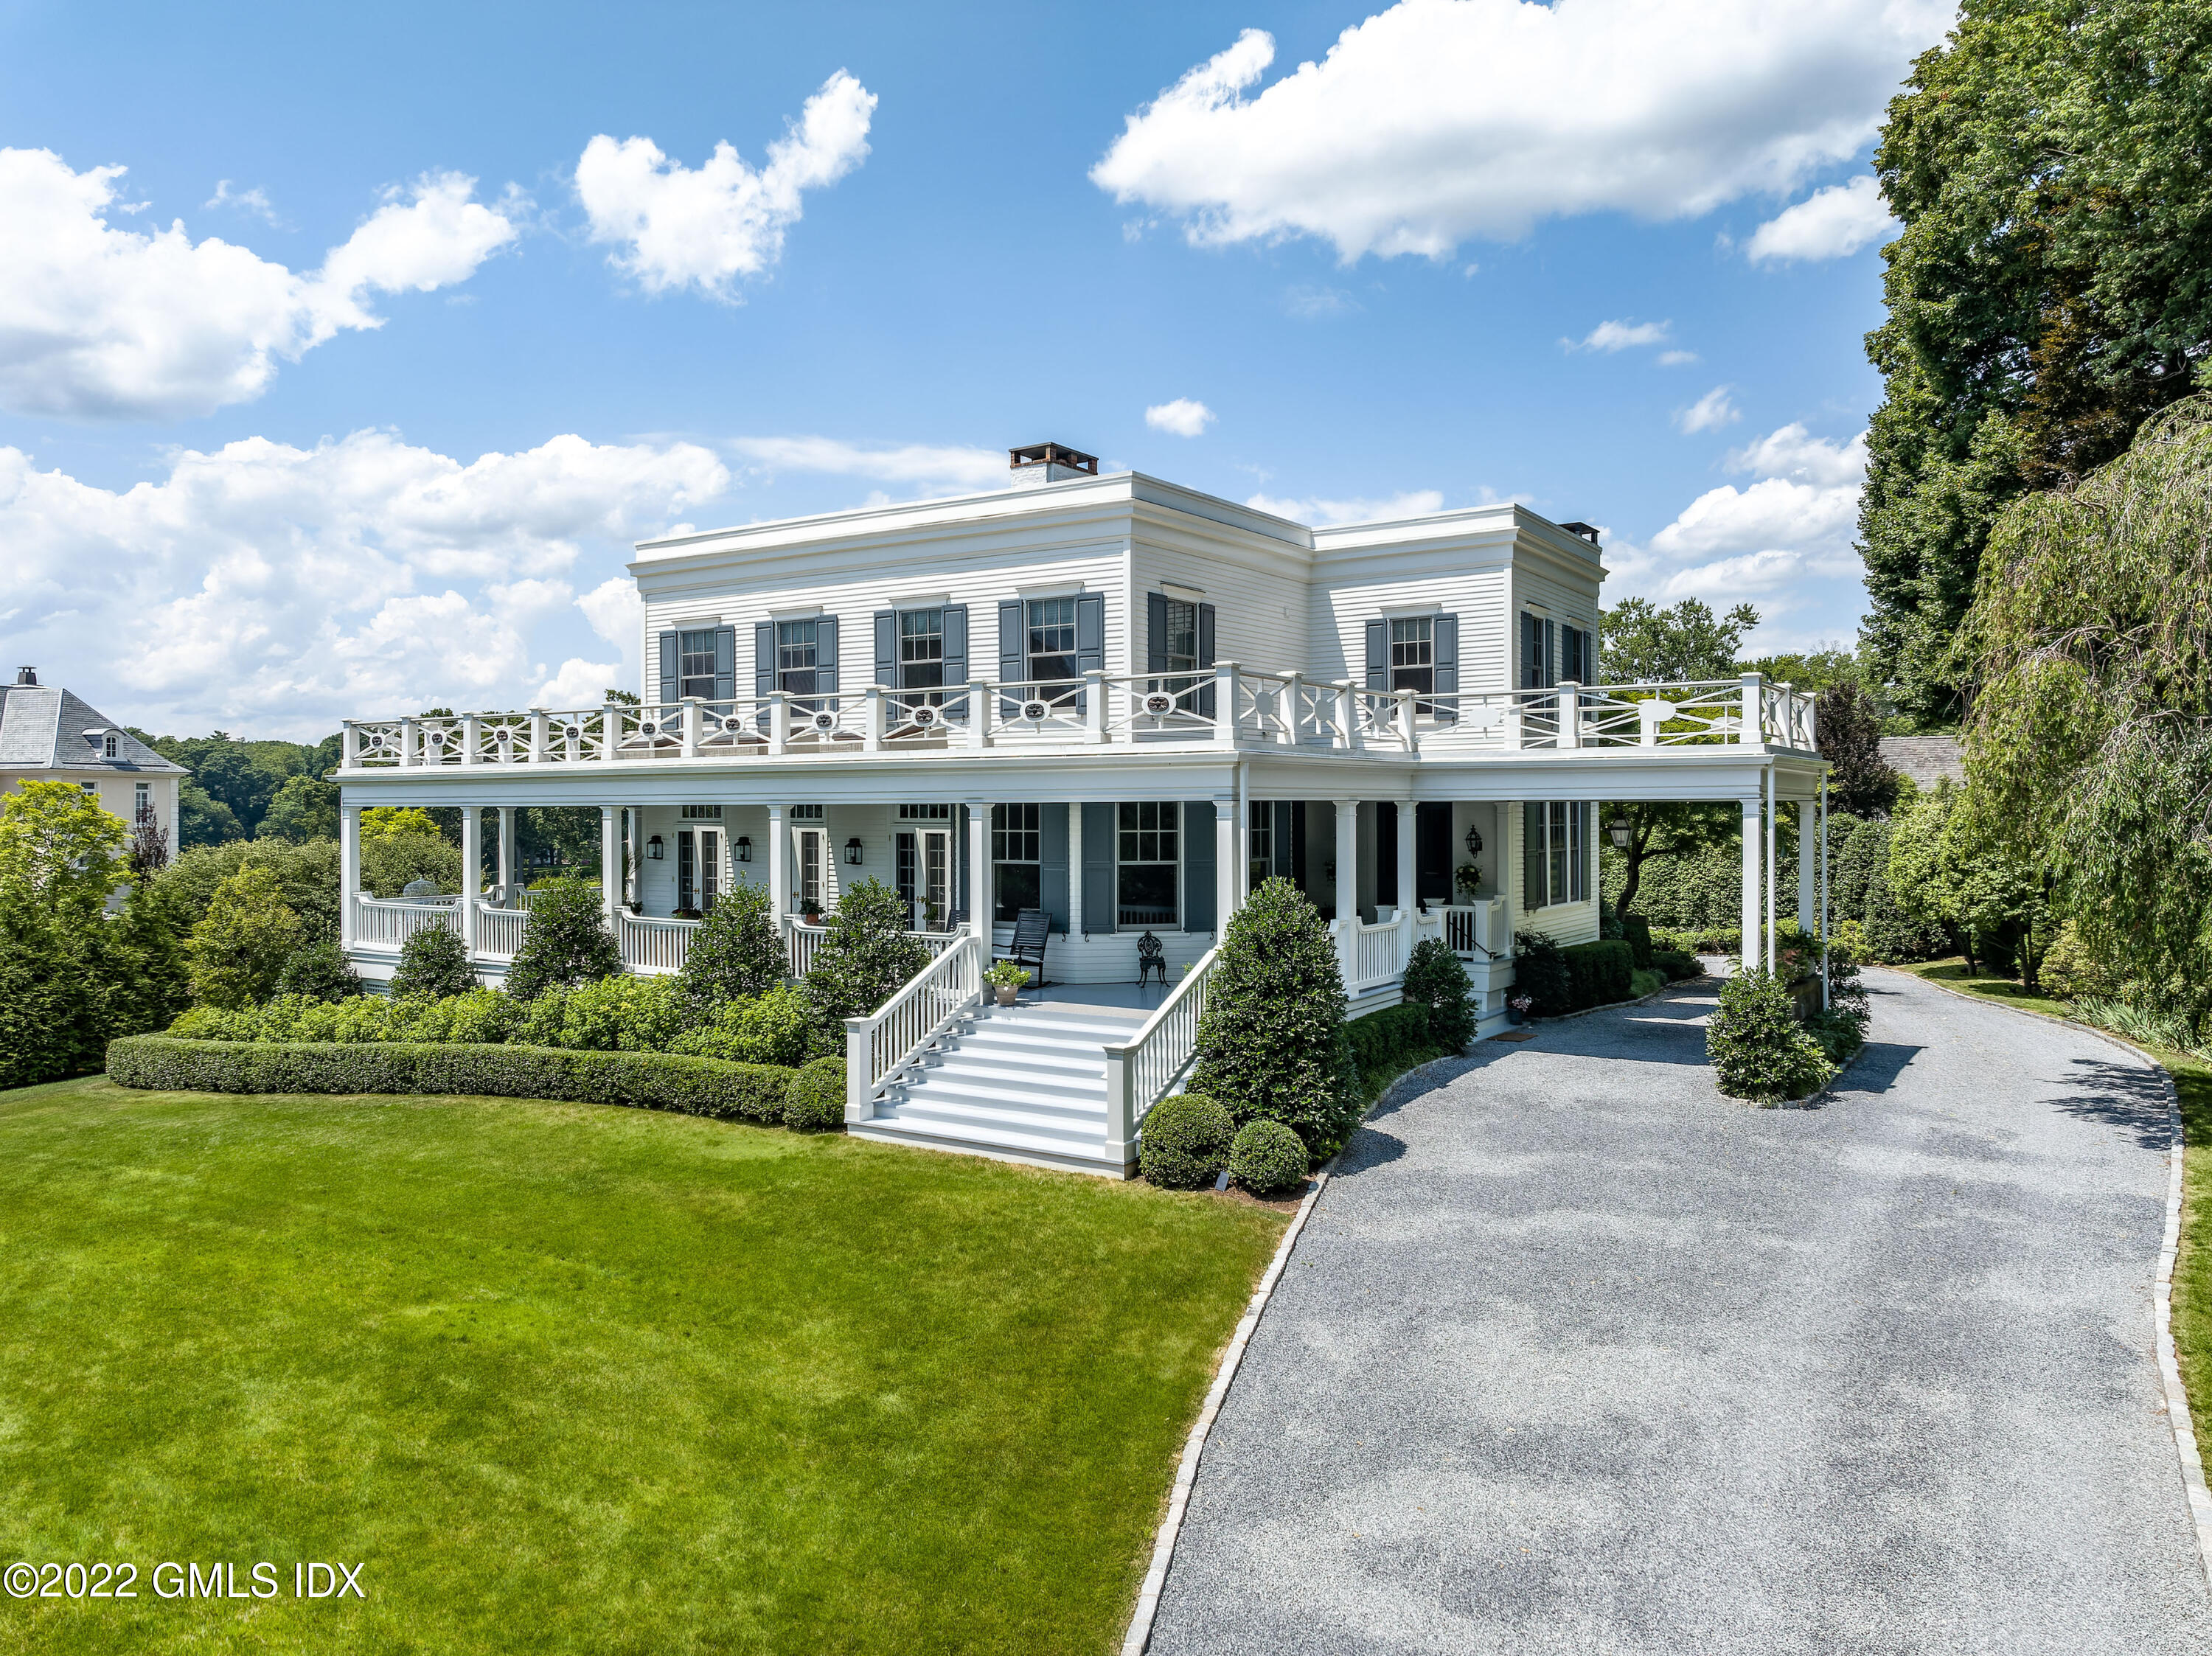 33 Byram Drive, Greenwich, Connecticut - 6 Bedrooms  
7.5 Bathrooms - 